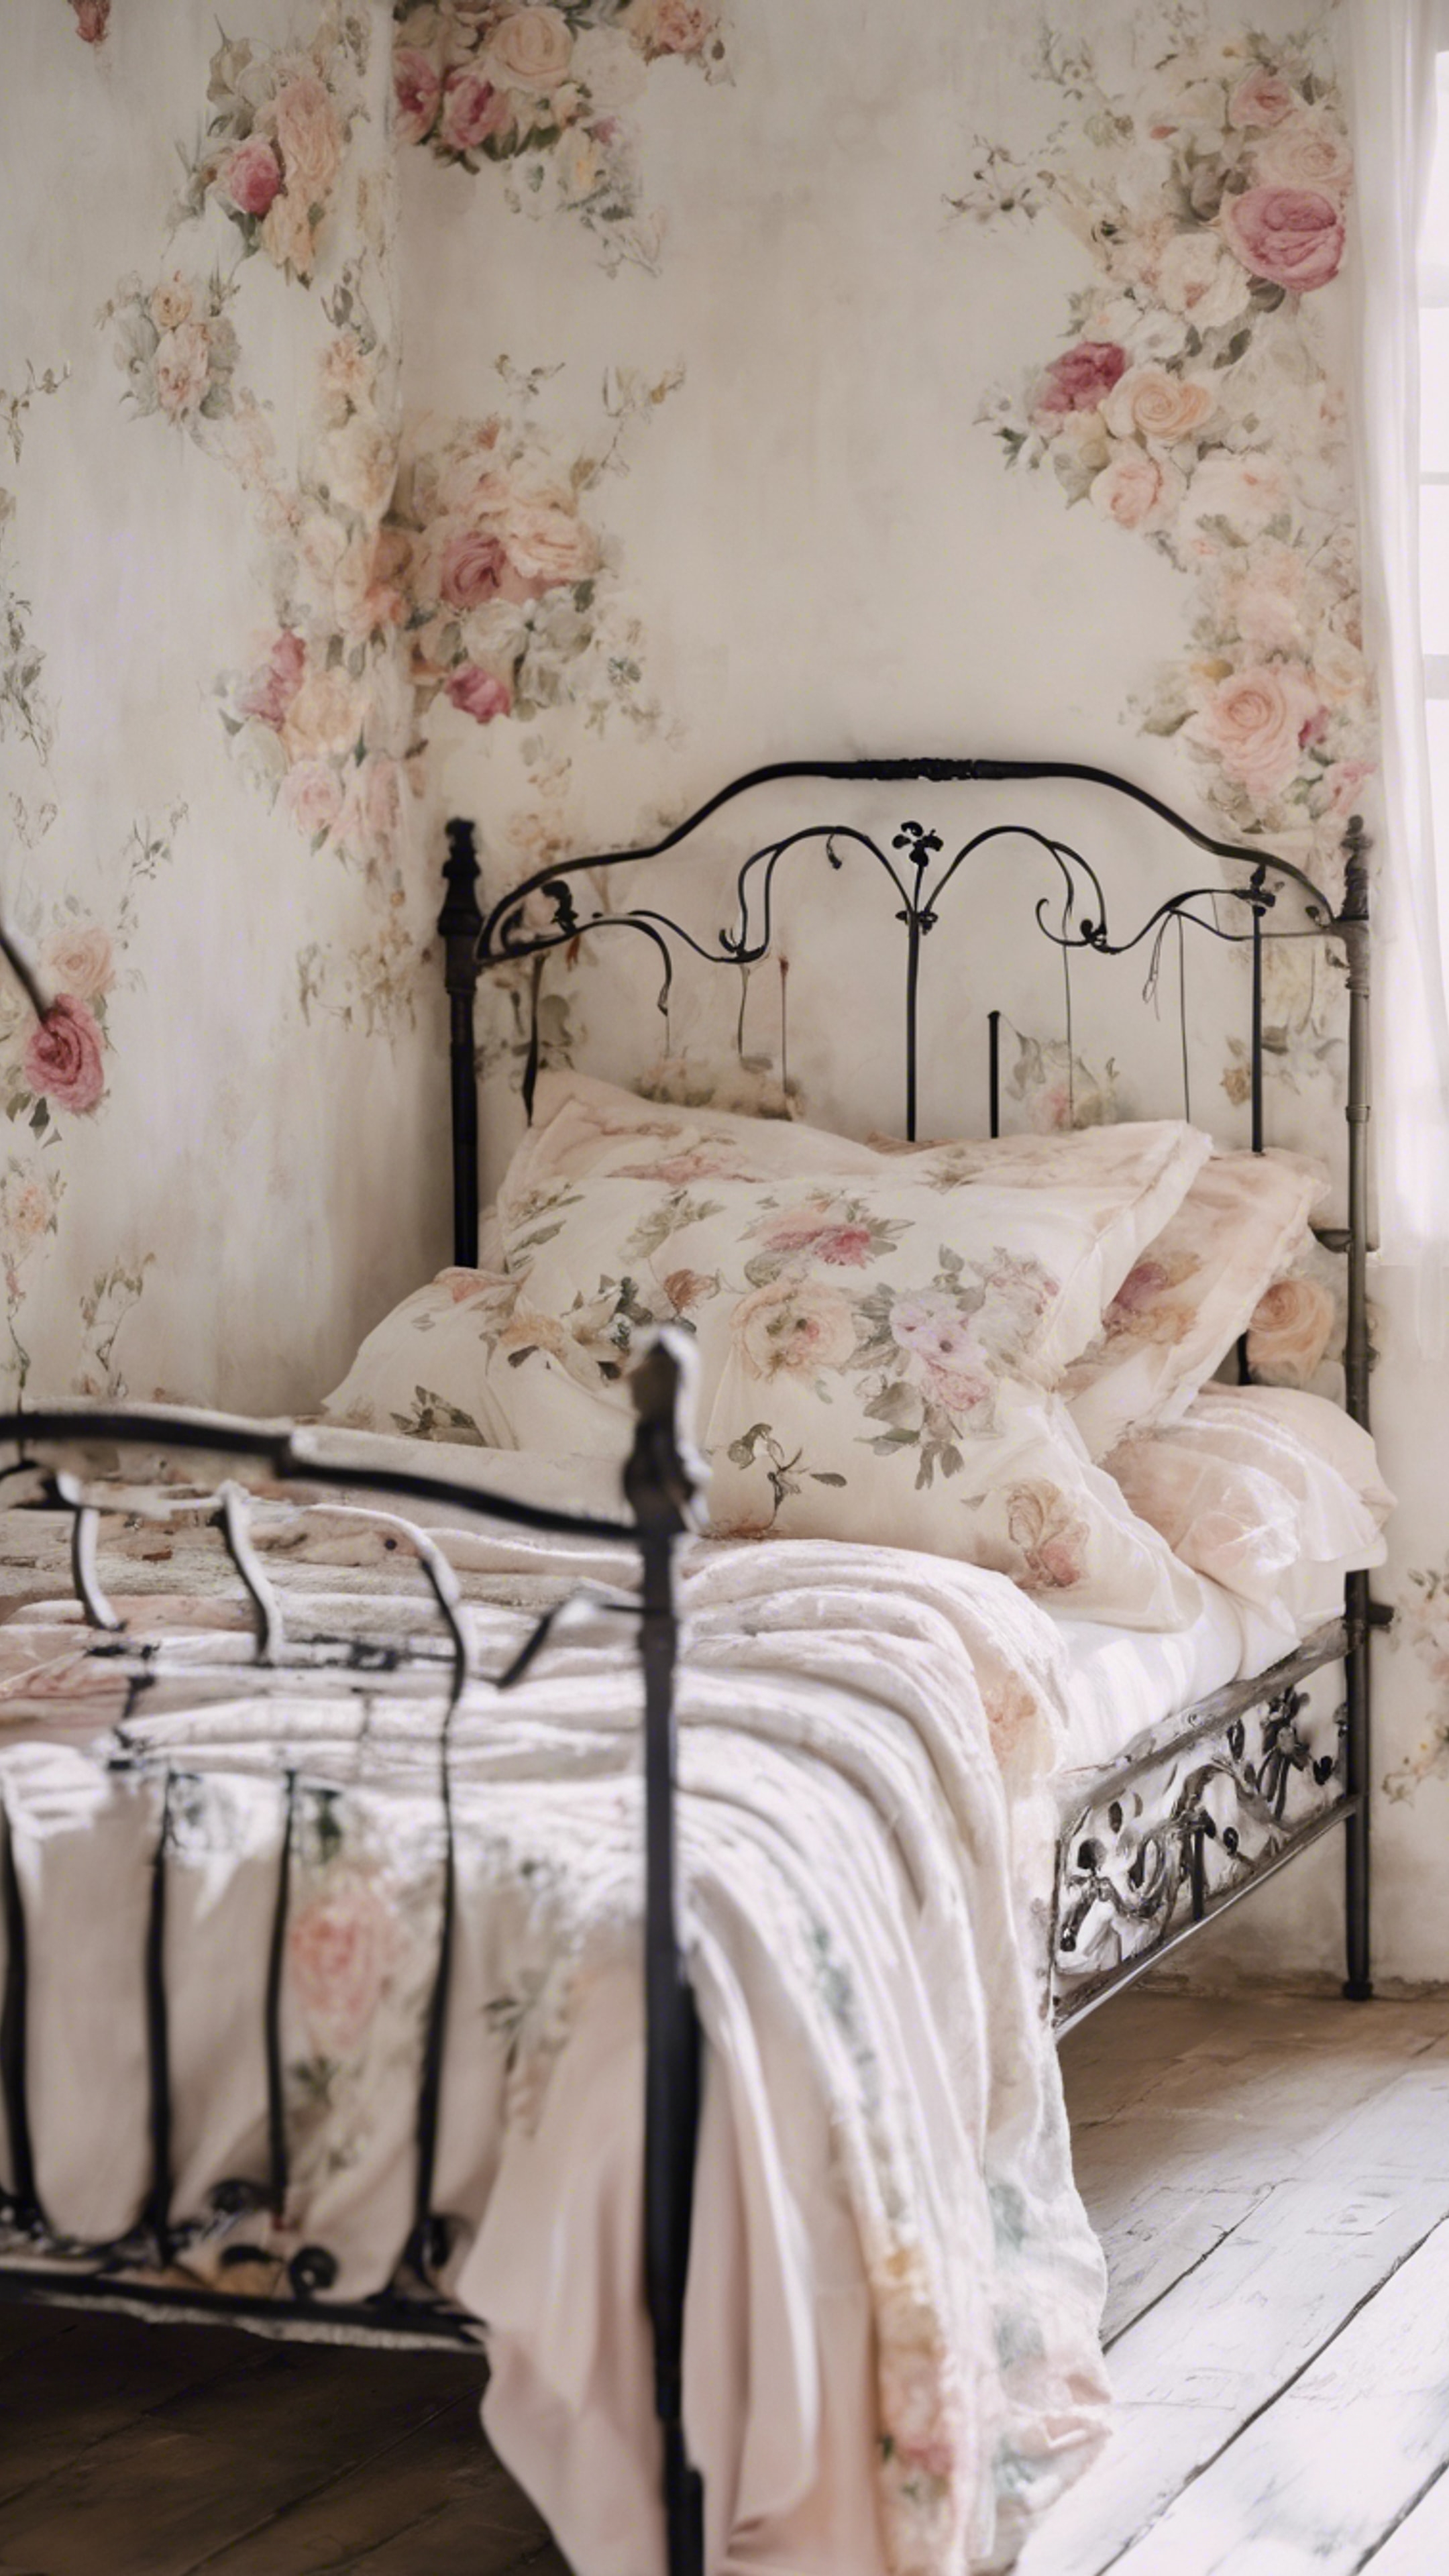 A French country bedroom featuring a wrought-iron bed and pastel floral patterns against whitewashed walls. ផ្ទាំង​រូបភាព[80b94b8799dc4ca6abc7]